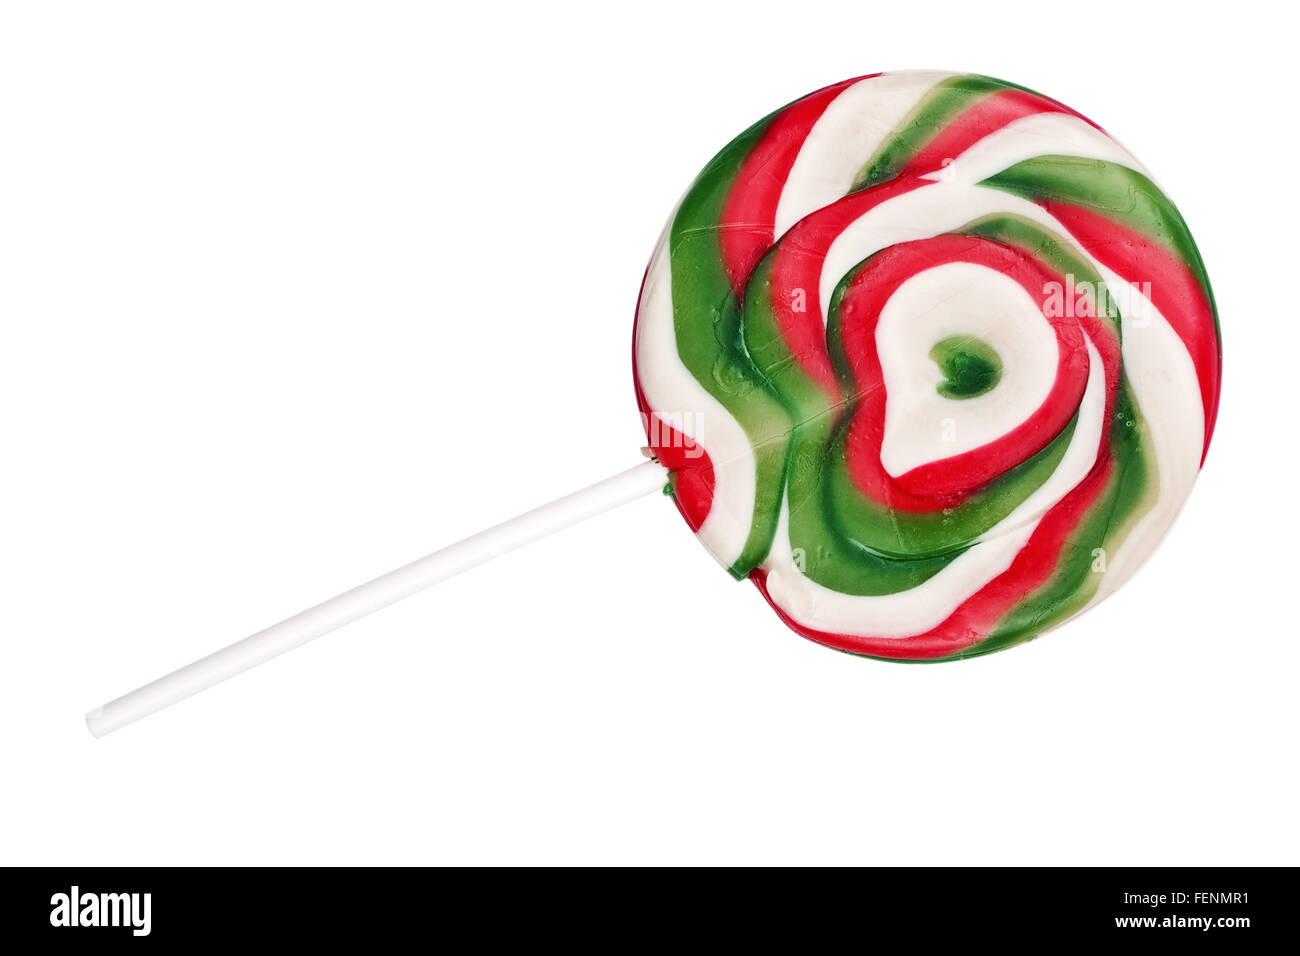 Colorful spiral lollipop isolated on white background Stock Photo